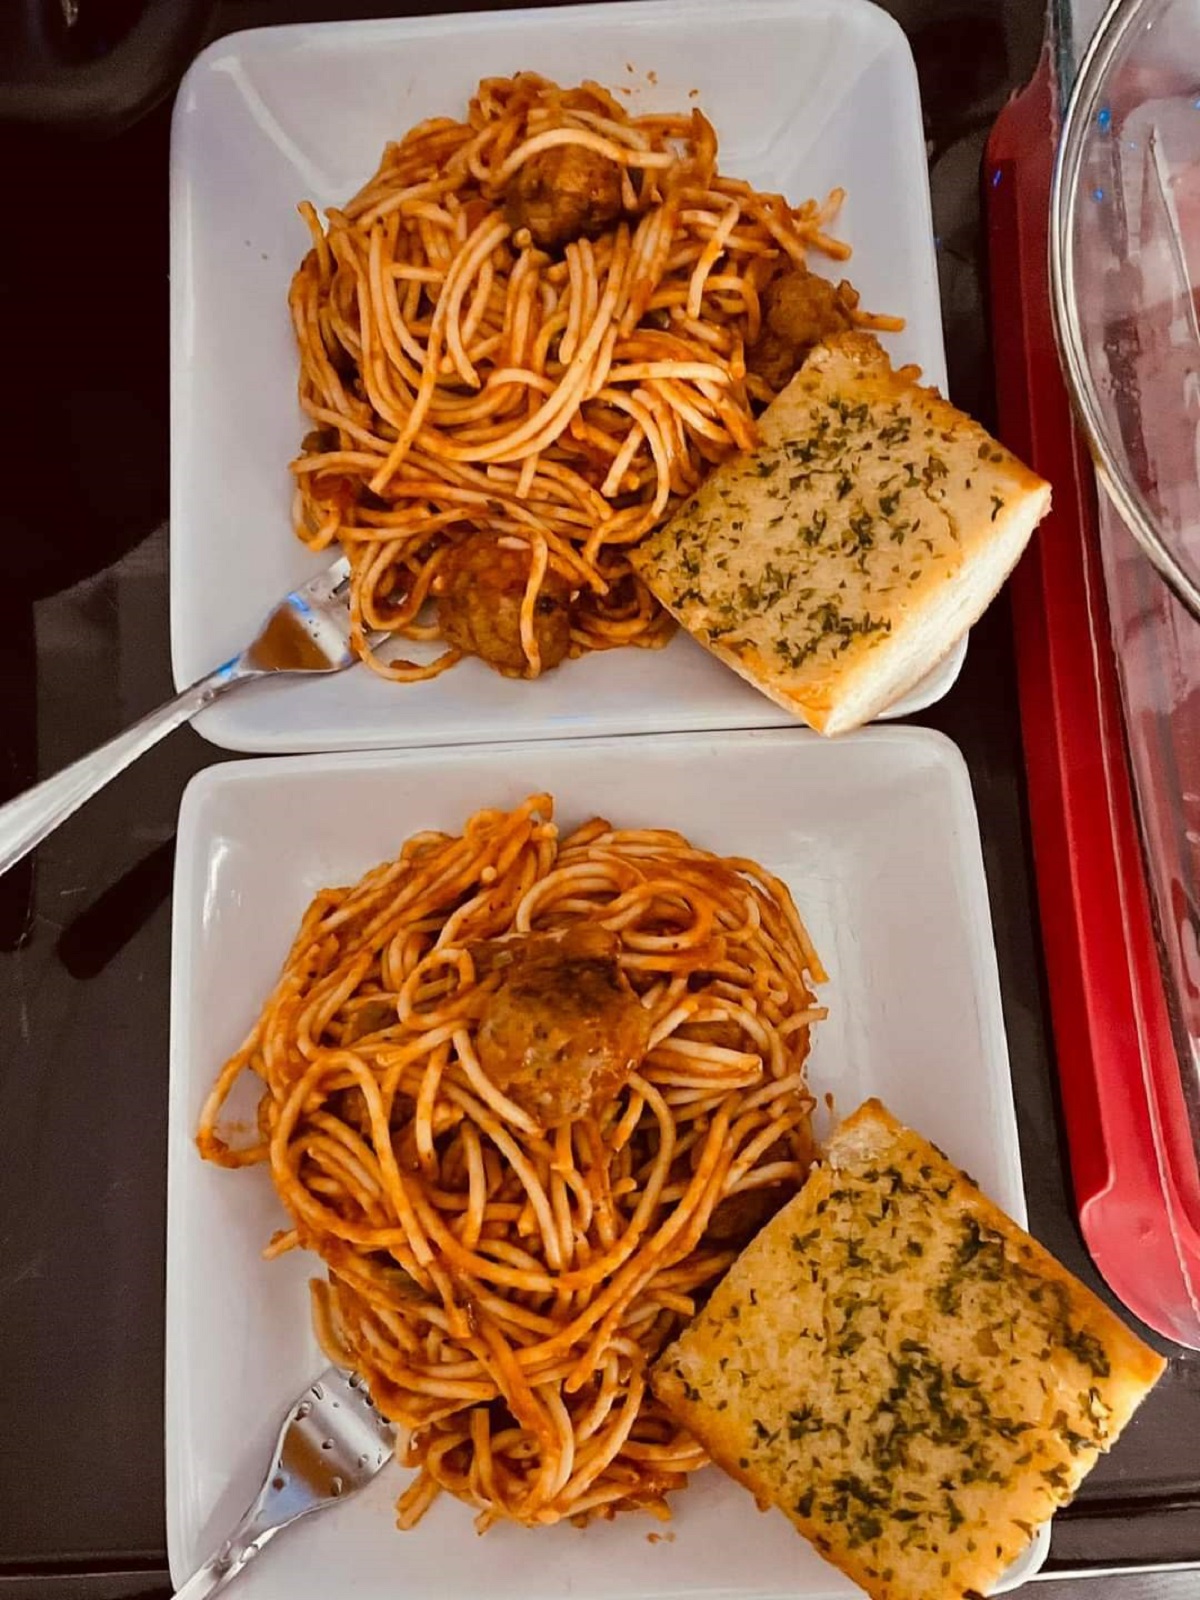 It's Not Much, But My Best Friend Cooked Us This Meal So That I Would Eat Something After A Few Days Of Depression-Nesting. Some Days You Need Spaghetti, Garlic Bread, And A Great Friend